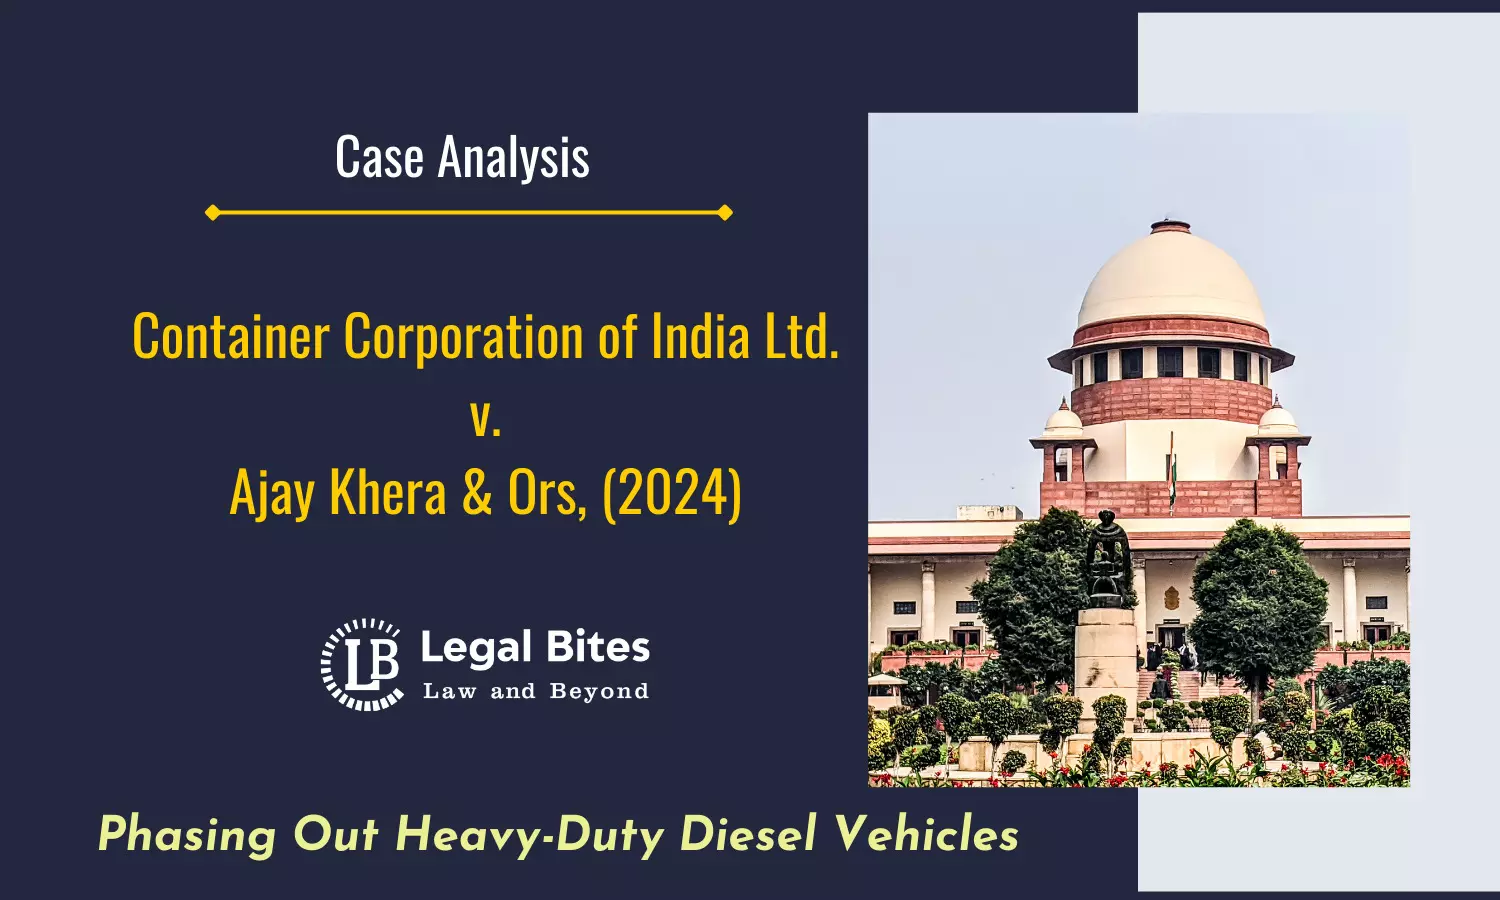 Case Analysis: Container Corporation of India Ltd. v. Ajay Khera & Ors, (2024) | Phasing Out Heavy-Duty Diesel Vehicles